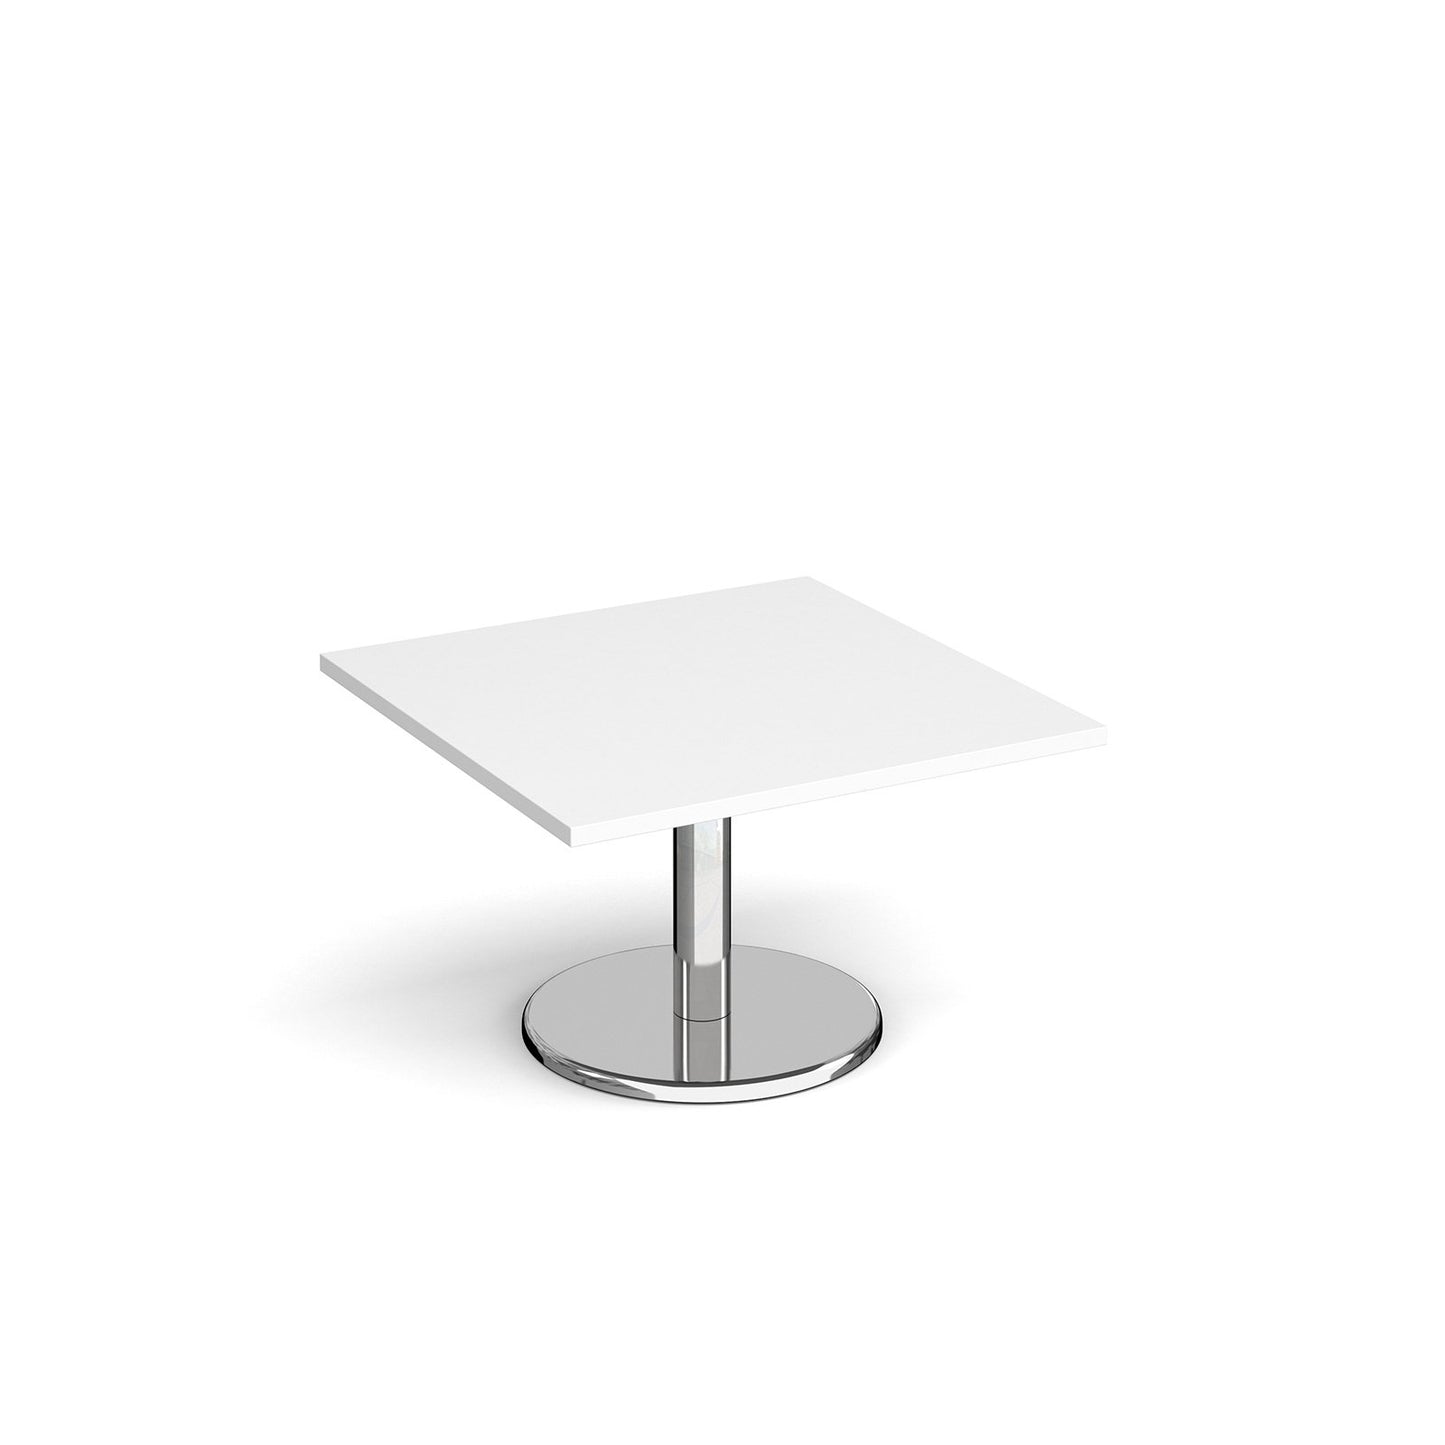 Pisa square coffee table with round base